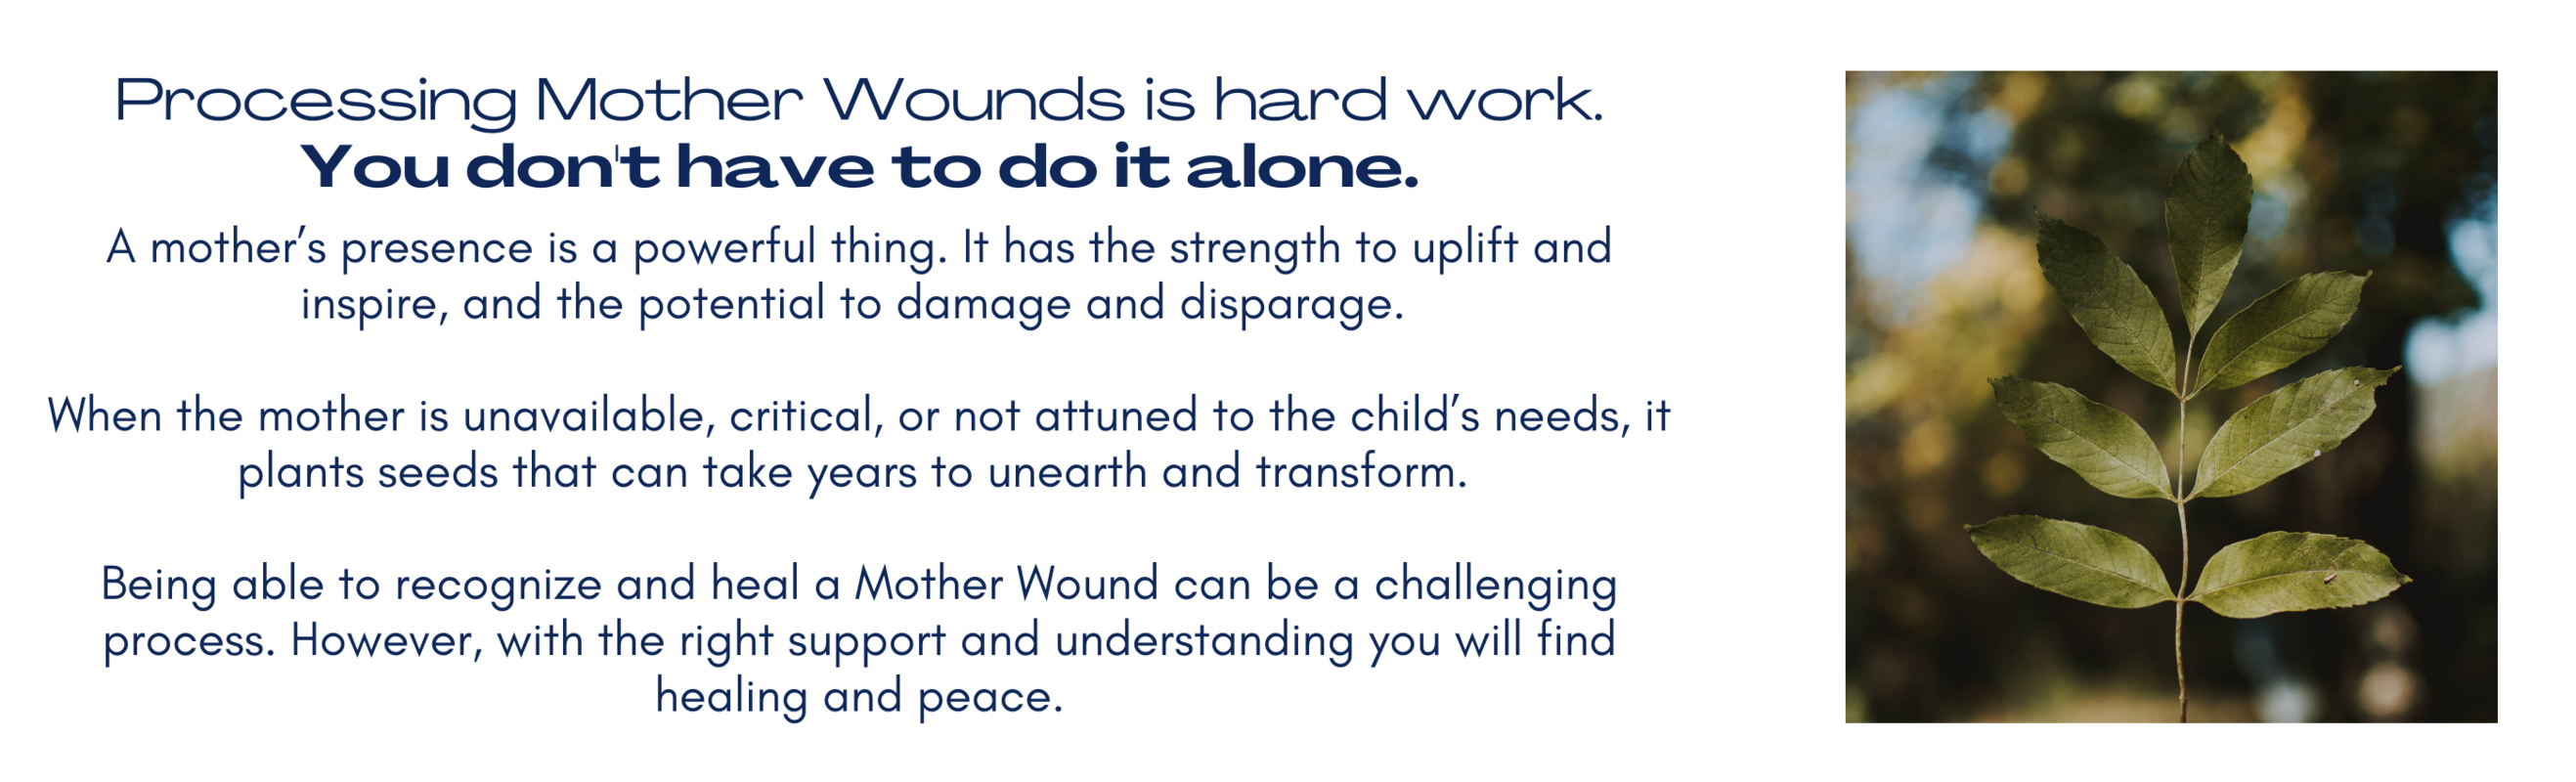 Processing Mother Wounds is hard work. You don't have to do it alone.